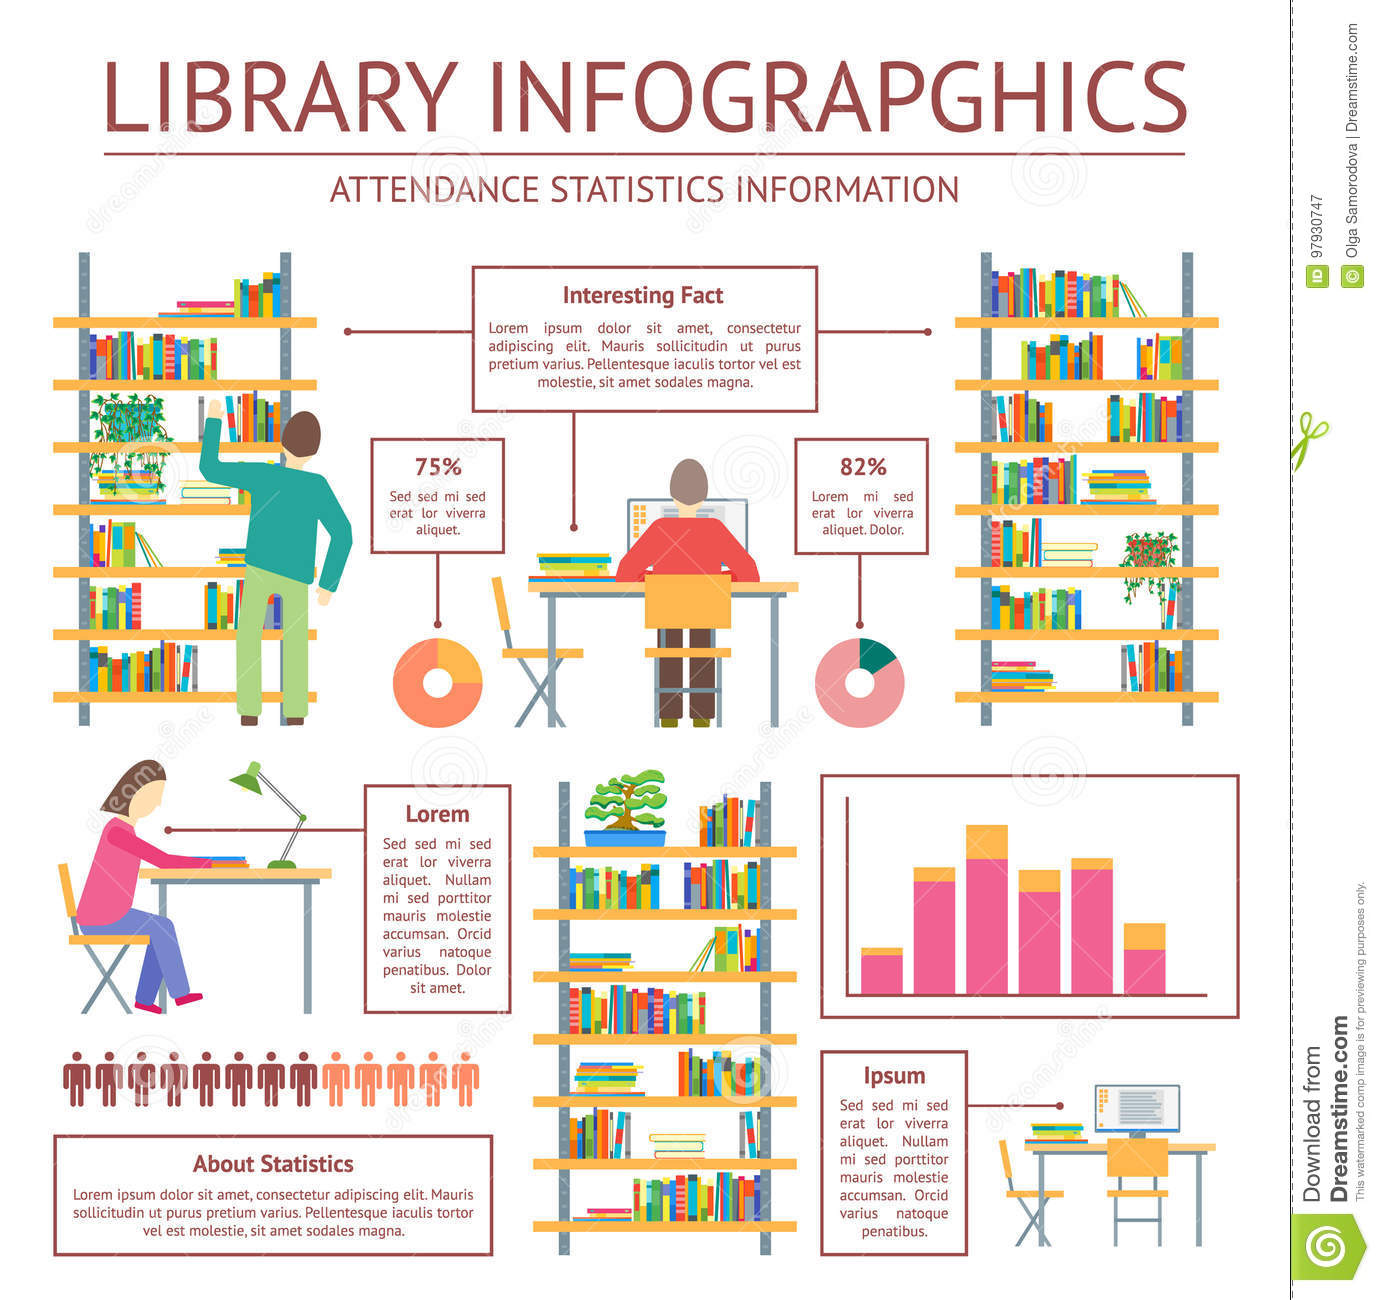 5 great examples how individual libraries promote themselves with infographics